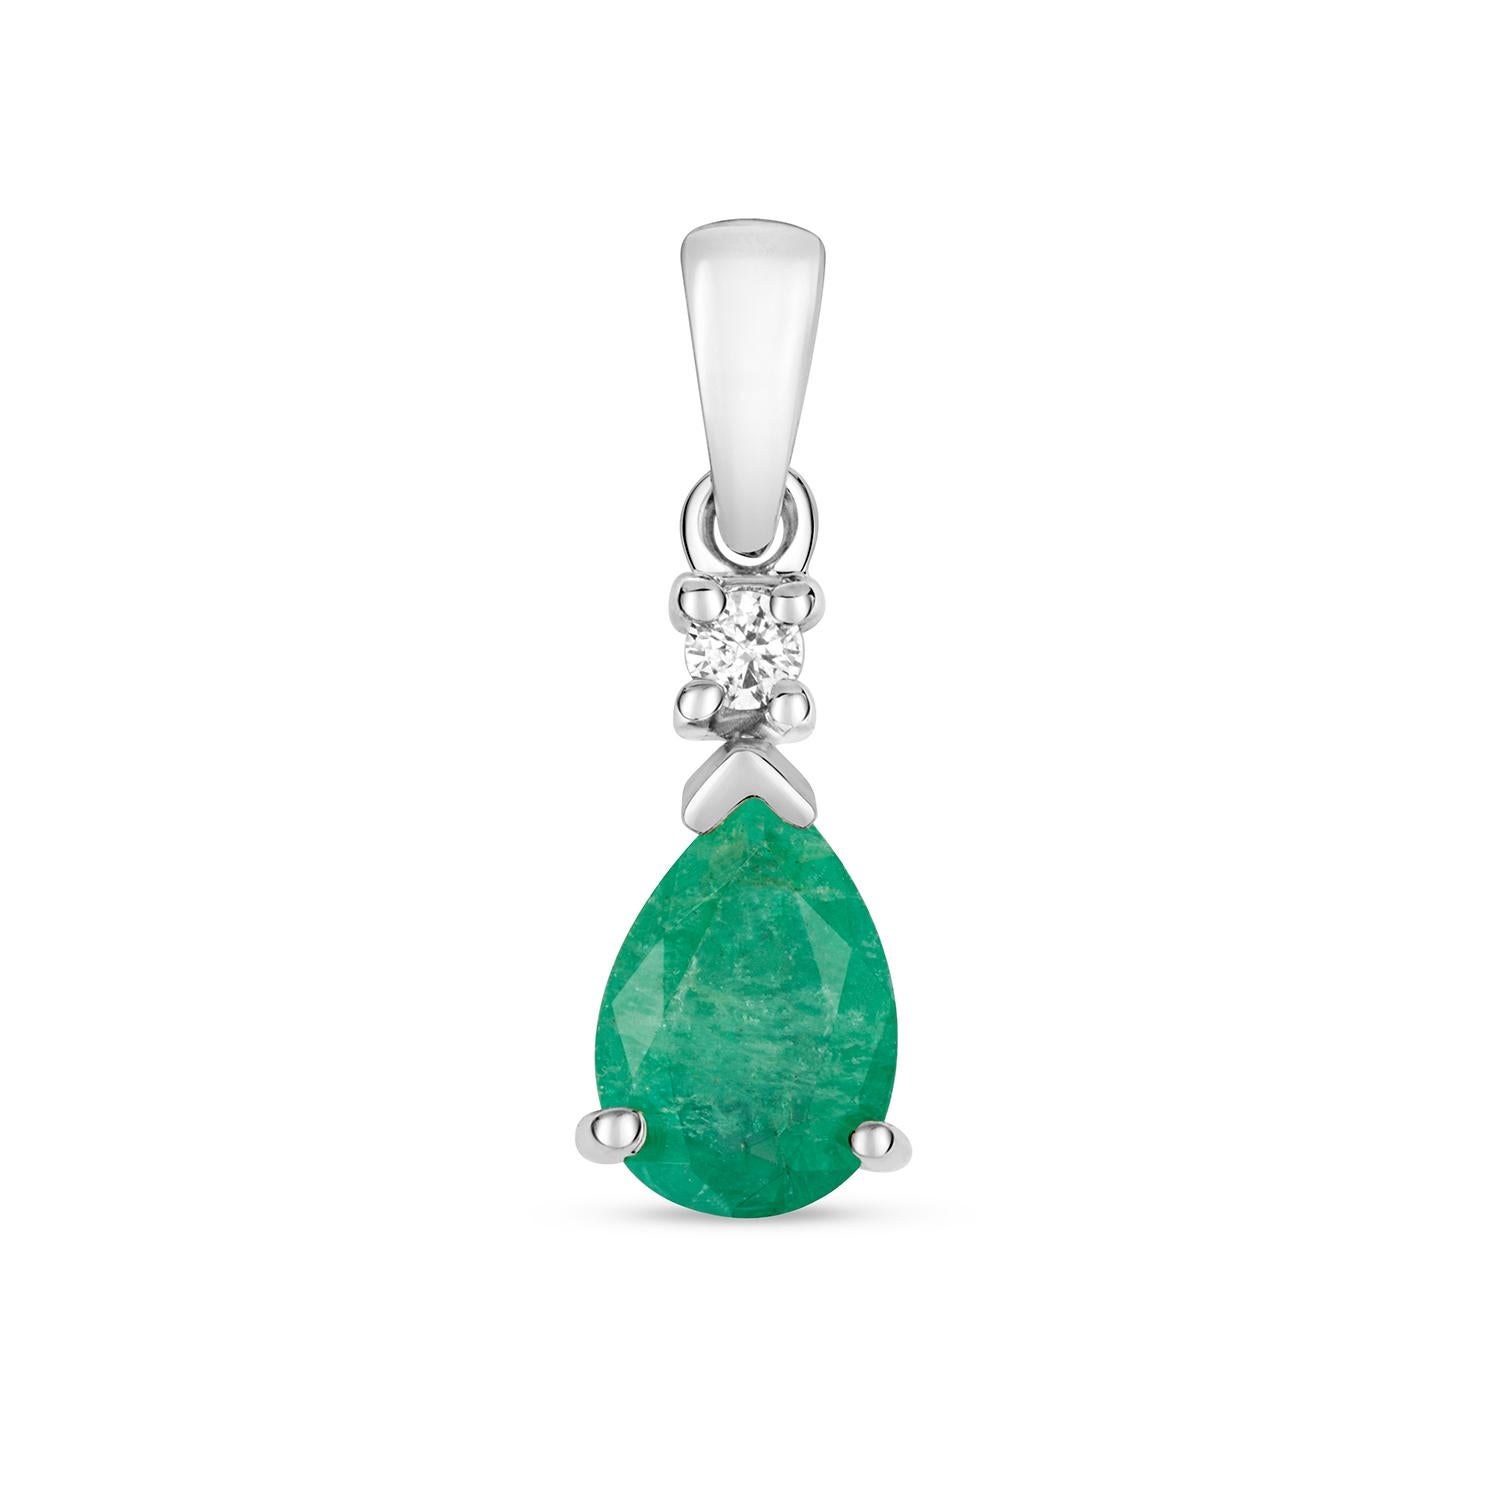 EMERALD PENDANT PEAR

9CT W/G PR/7X5 EMD

Weight: 0.85g

Number Of Stones:1

Total Carates:0.750